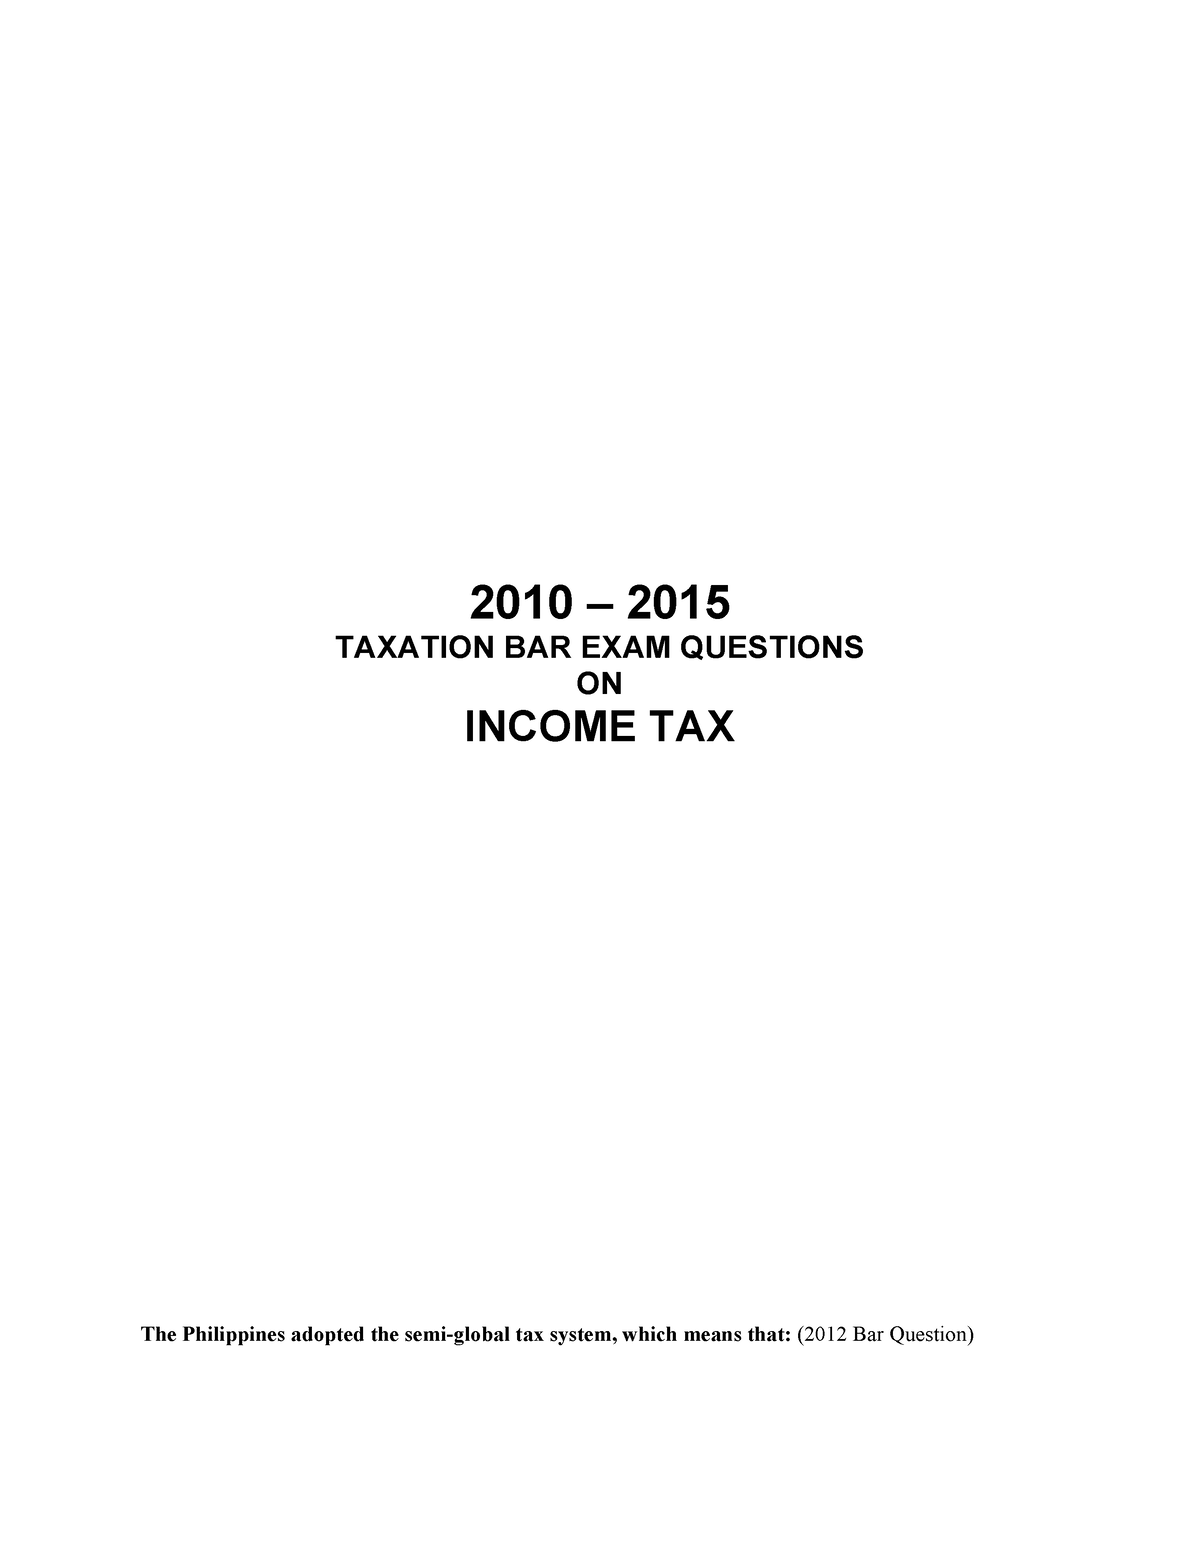 income-tax-paper-2010-2015-taxation-bar-exam-questions-on-income